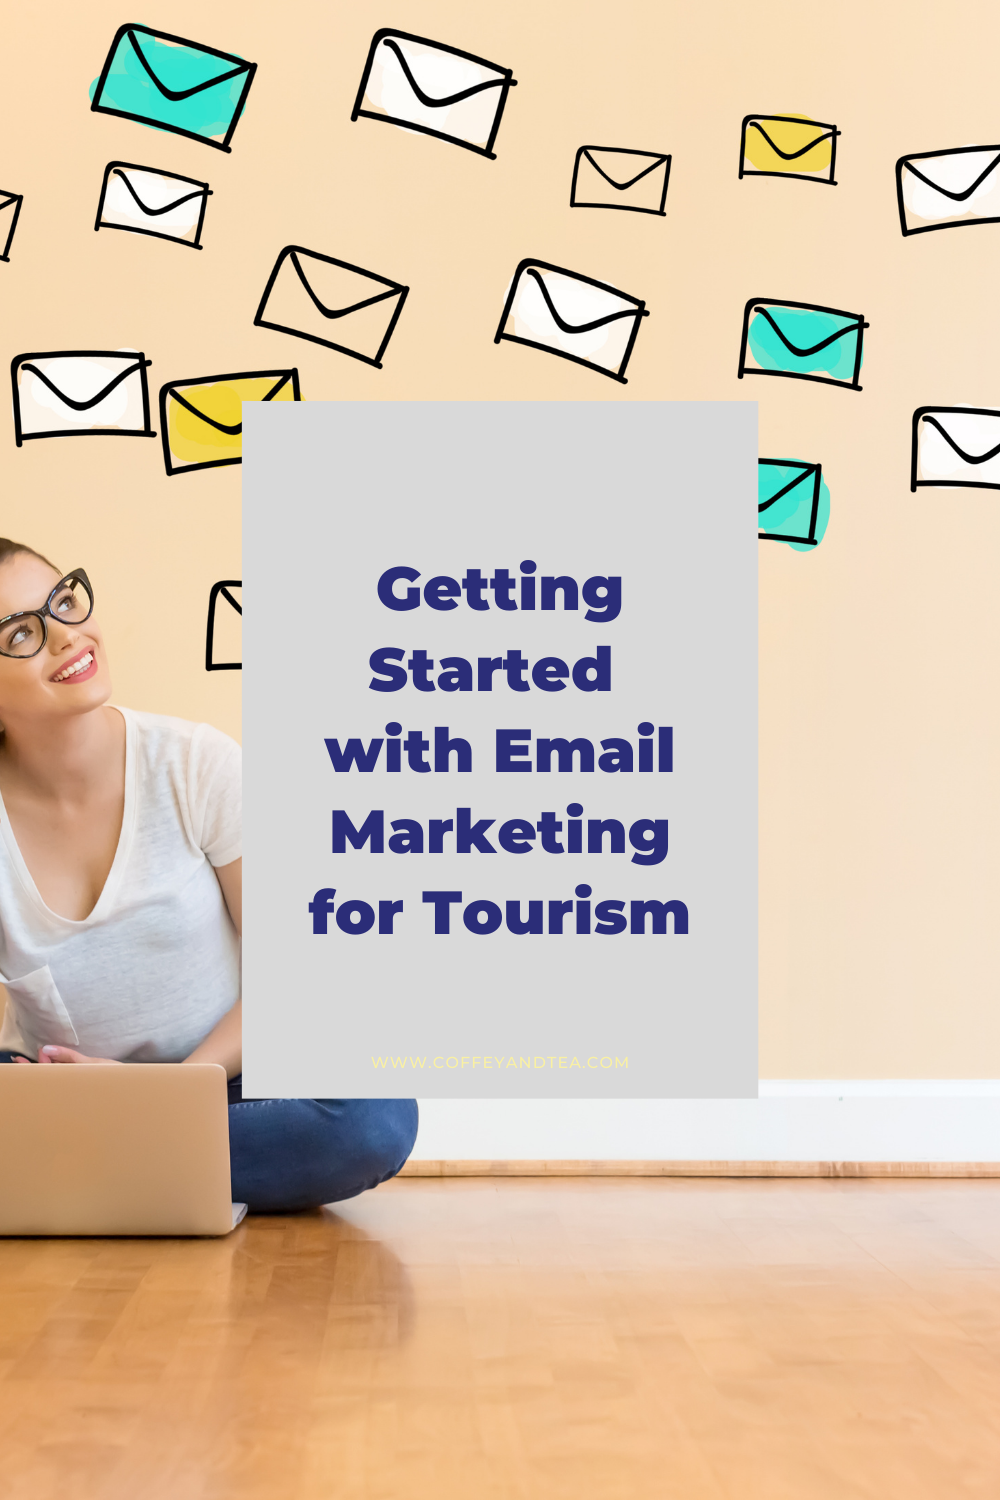 A Tourism Marketer’s Guide to Getting Started with Email Marketing